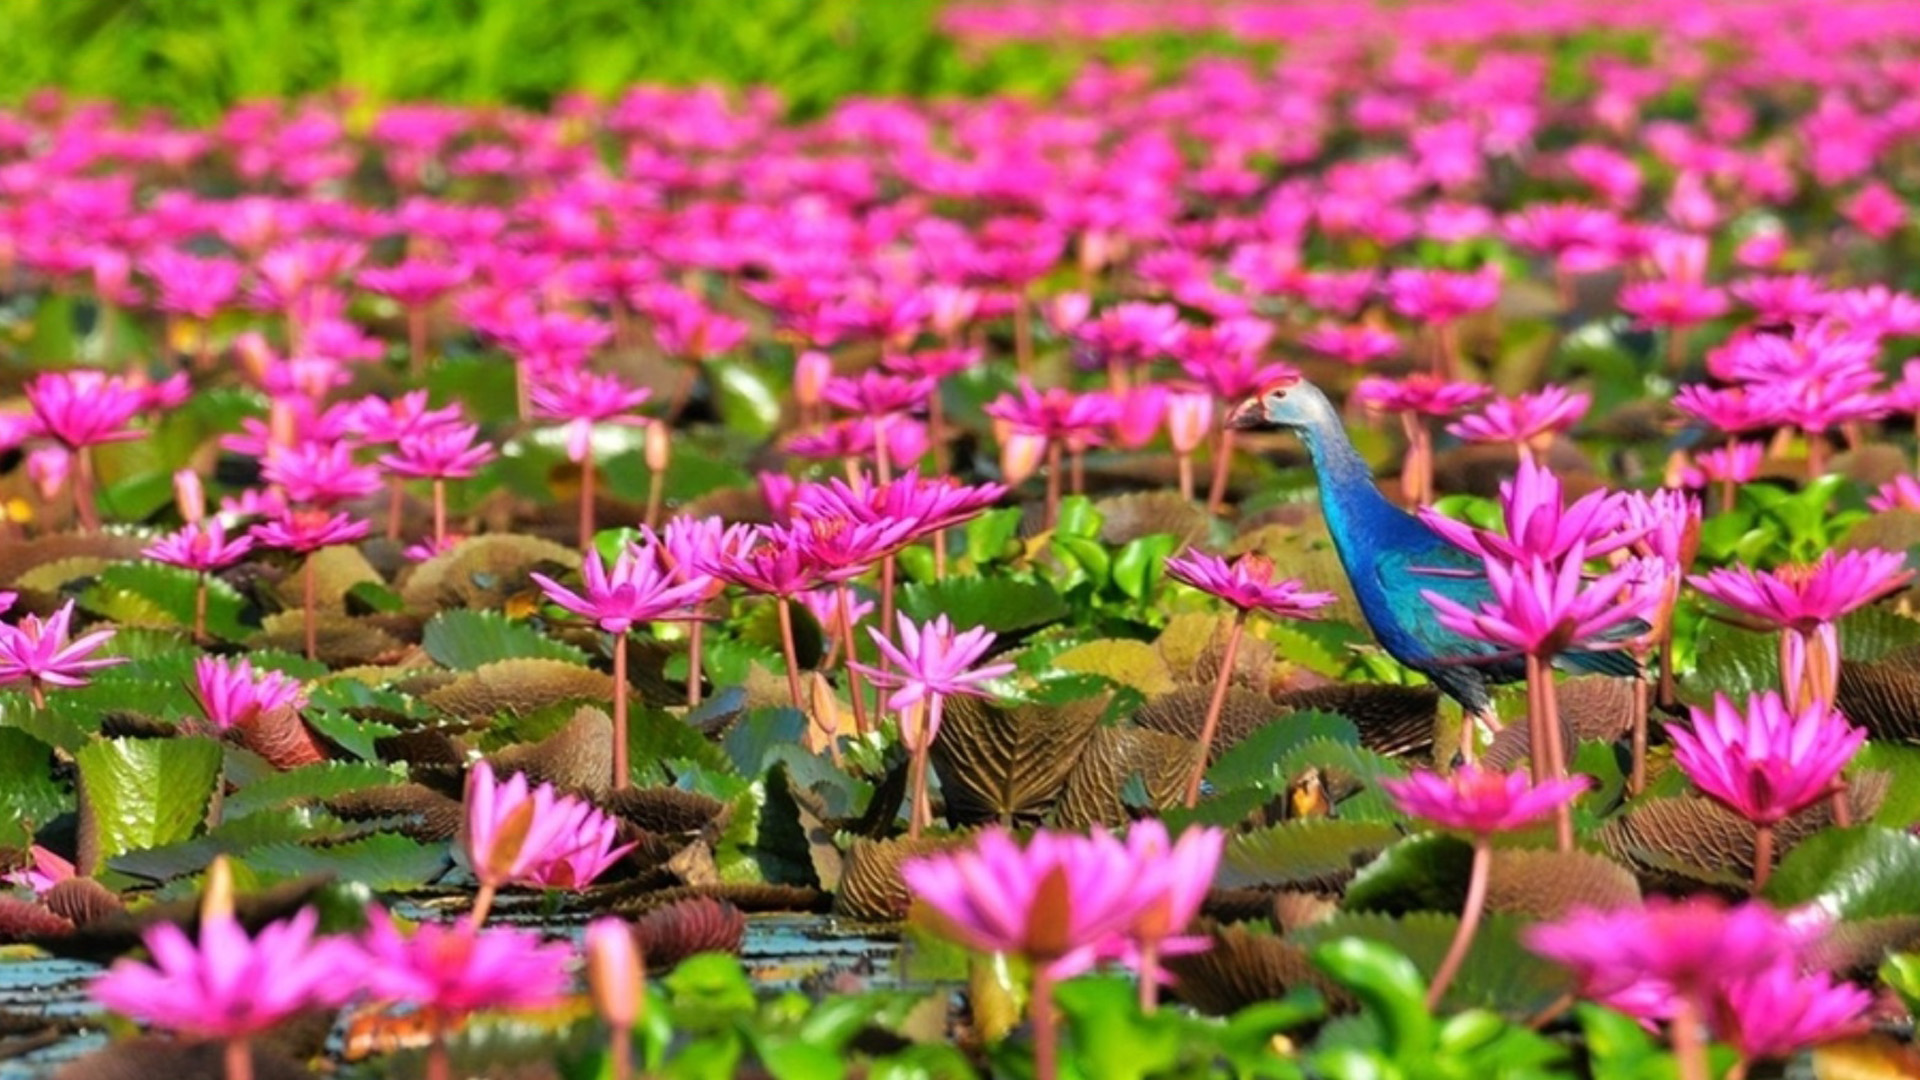 Lotus Lake Thale Noi Lake In Thailand Phatthalung Province Red Flowers Full  Hd Wallpapers 1920x1080 : 